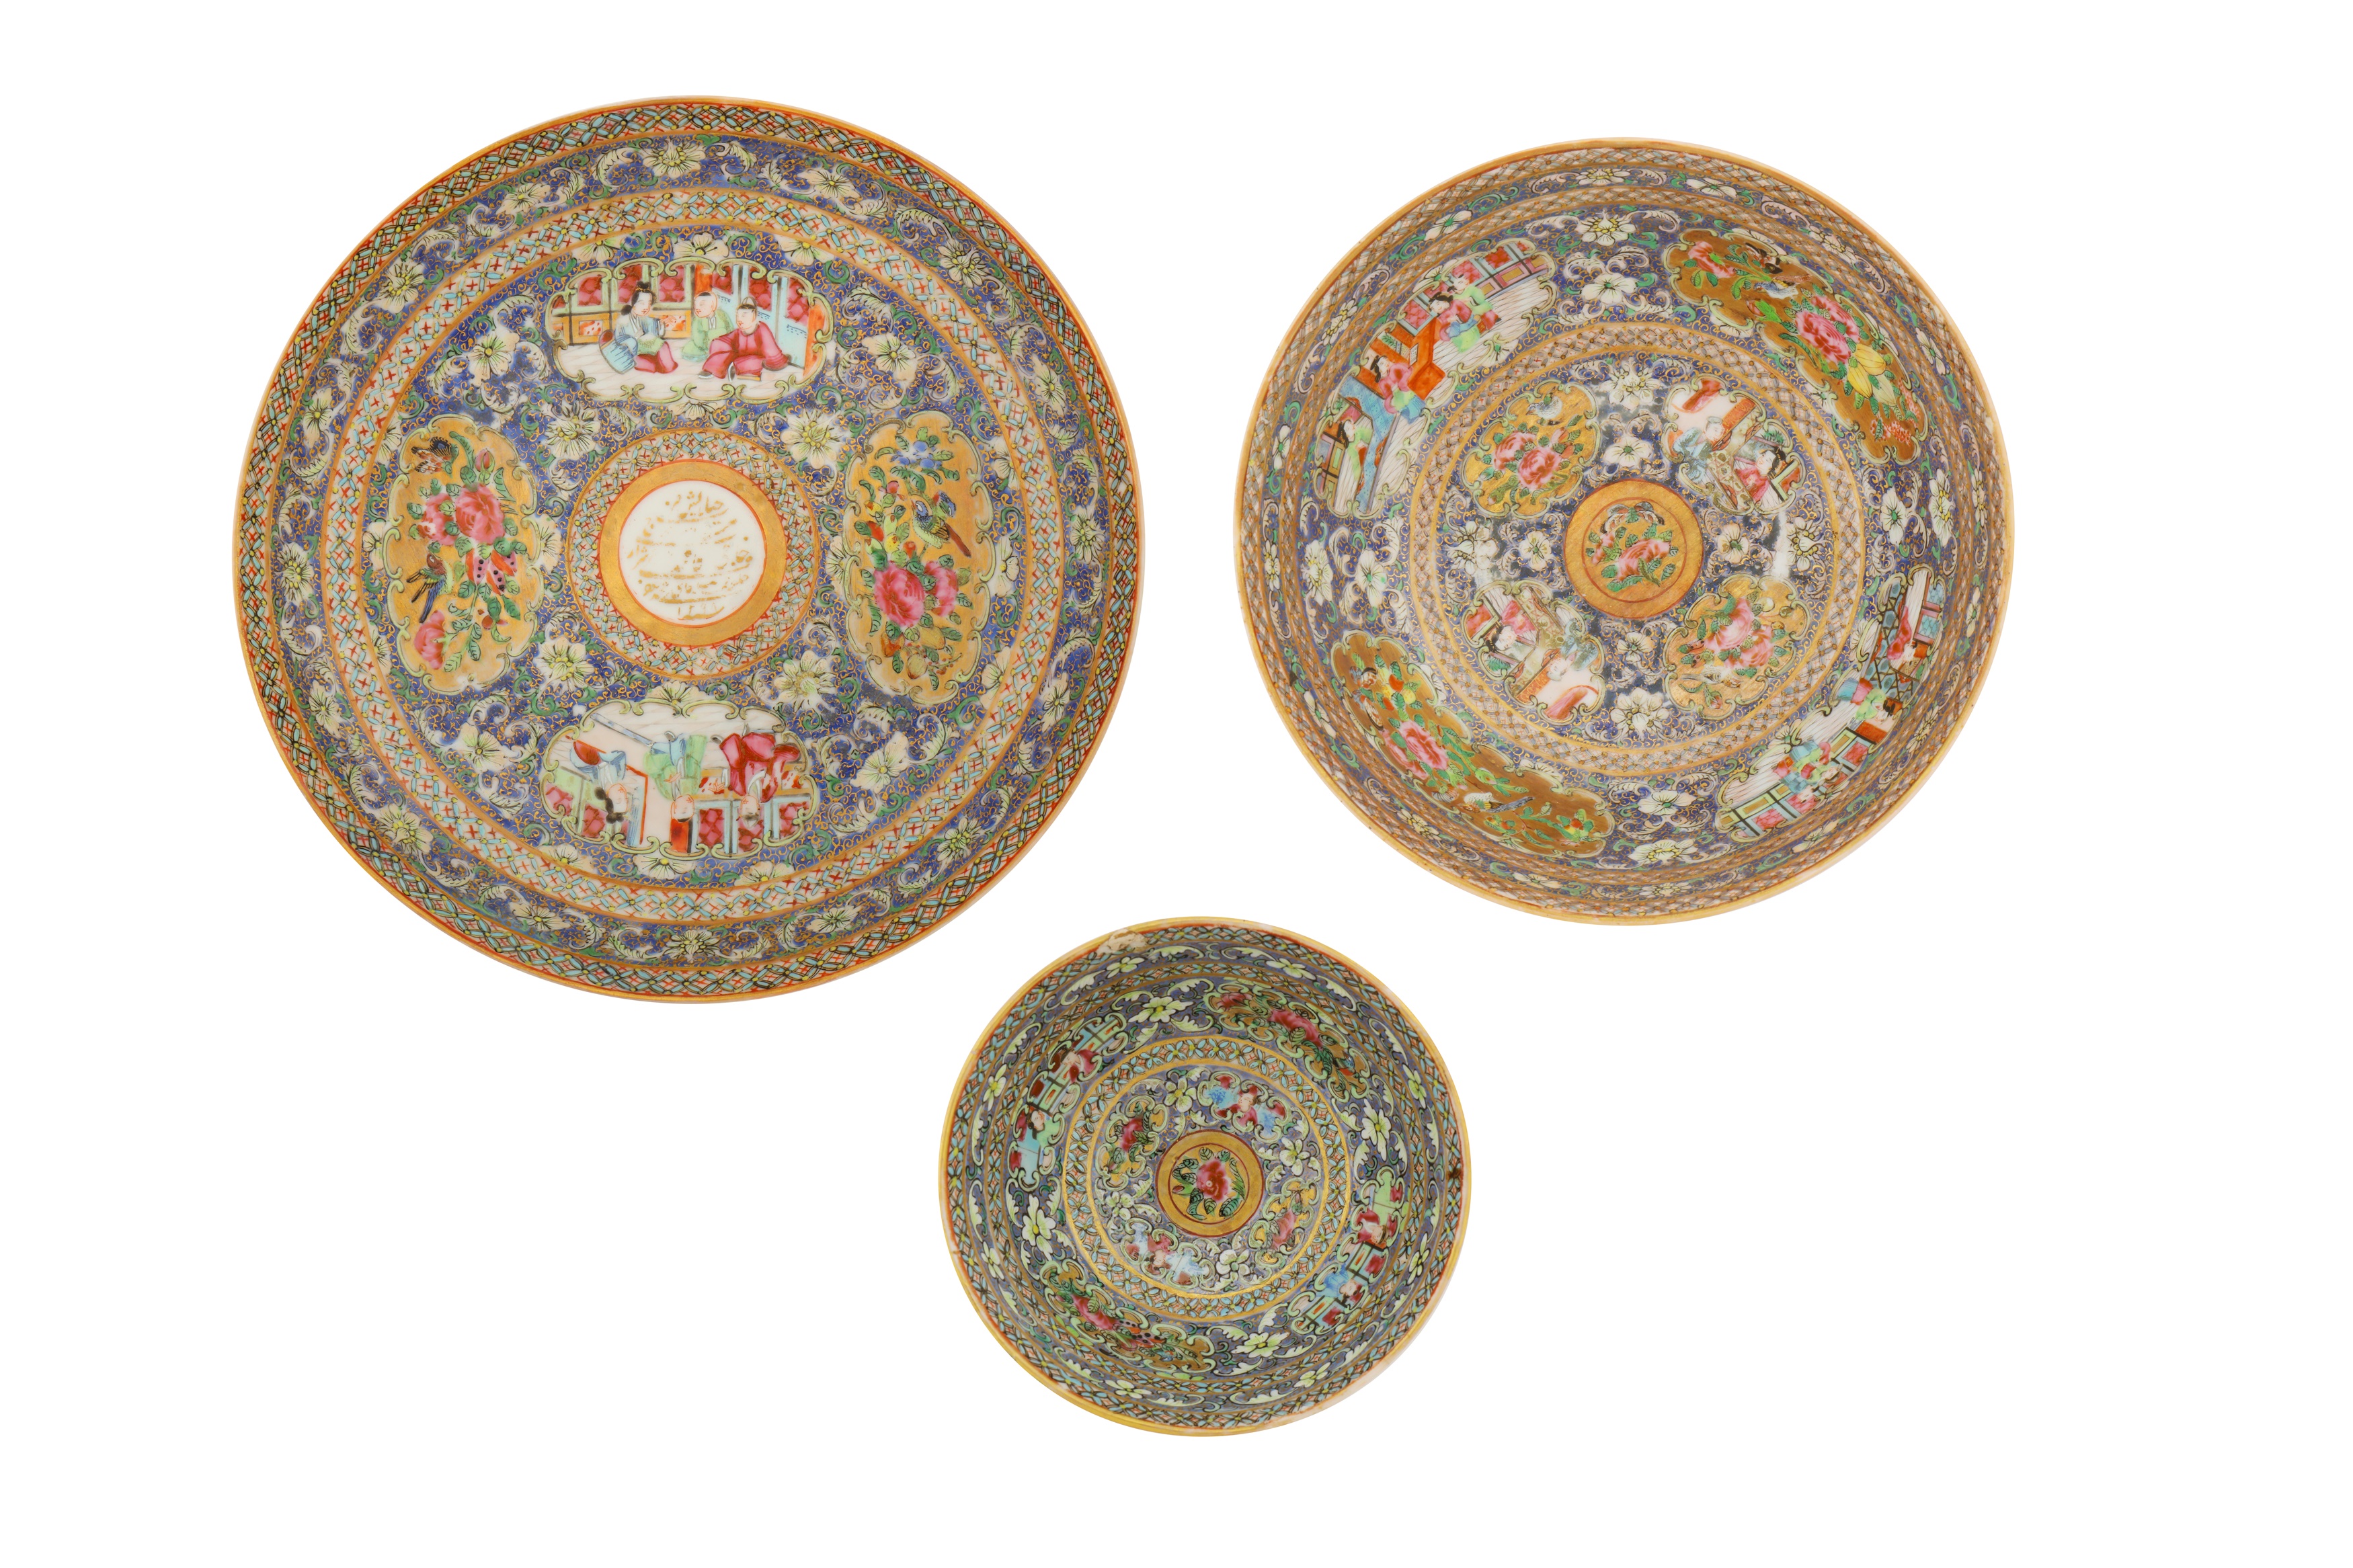 A MEDIUM-SIZED BOWL AND DISH AND SMALLER BOWL FROM THE ZILL AL-SULTAN CANTON PORCELAIN SERVICE